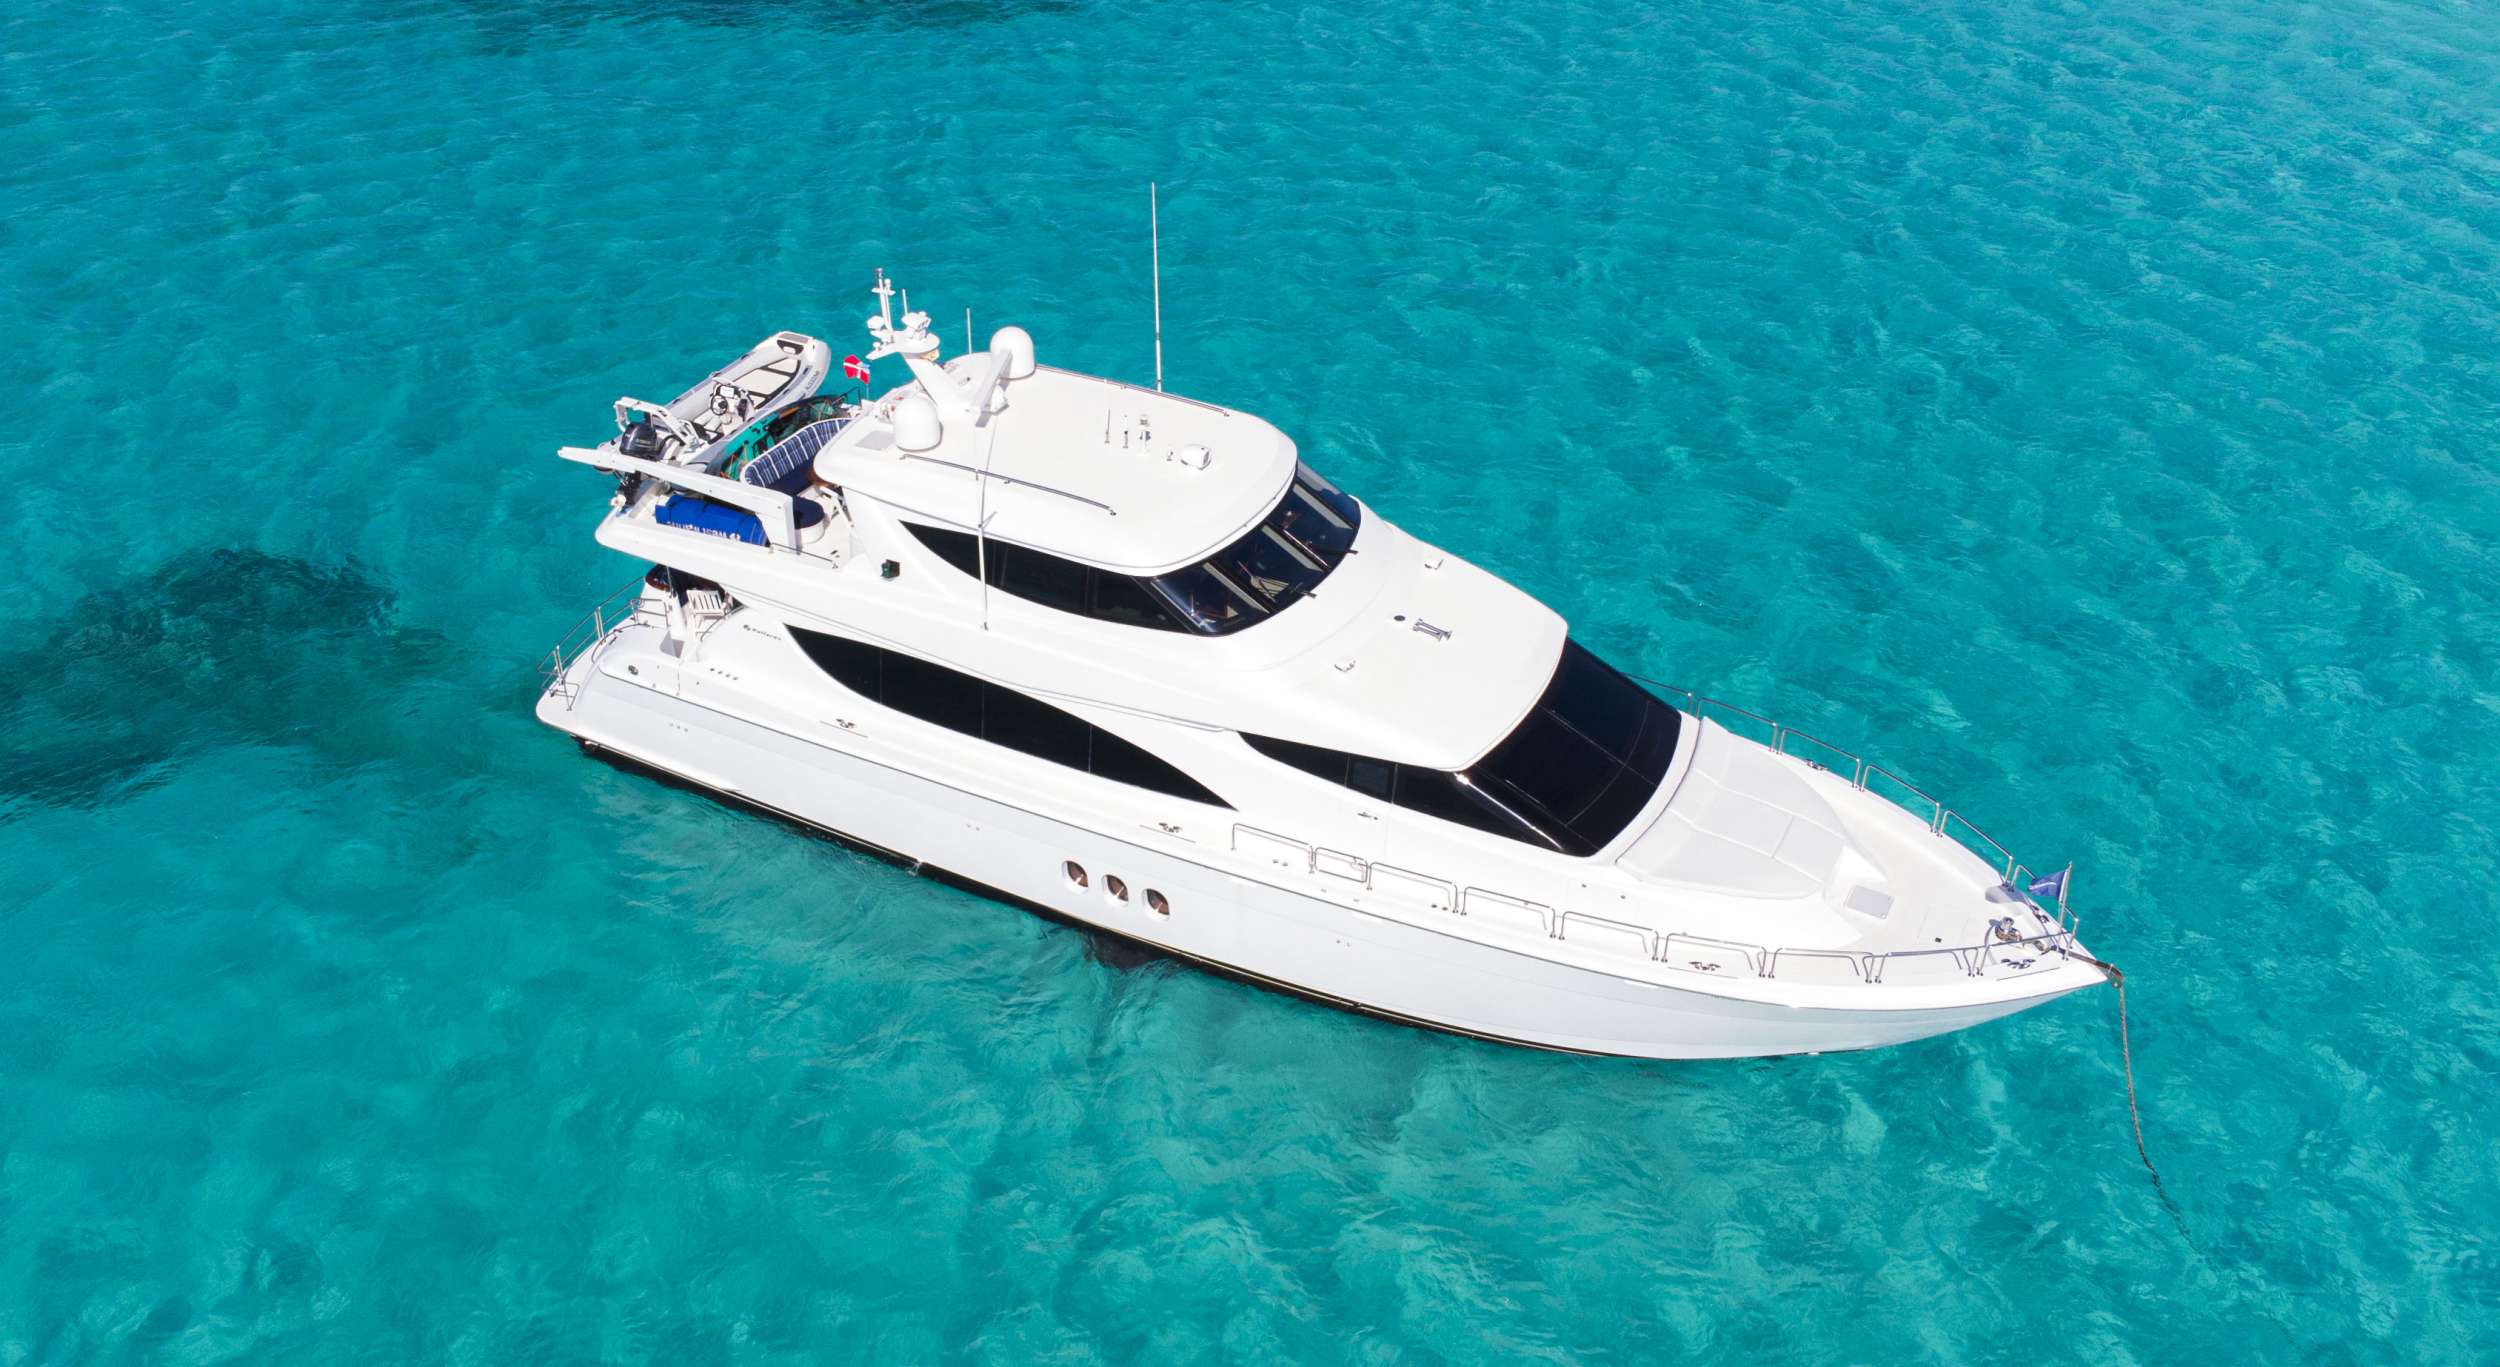 Gail Force II - Yacht Charter Miami & Boat hire in US East Coast & Bahamas 1